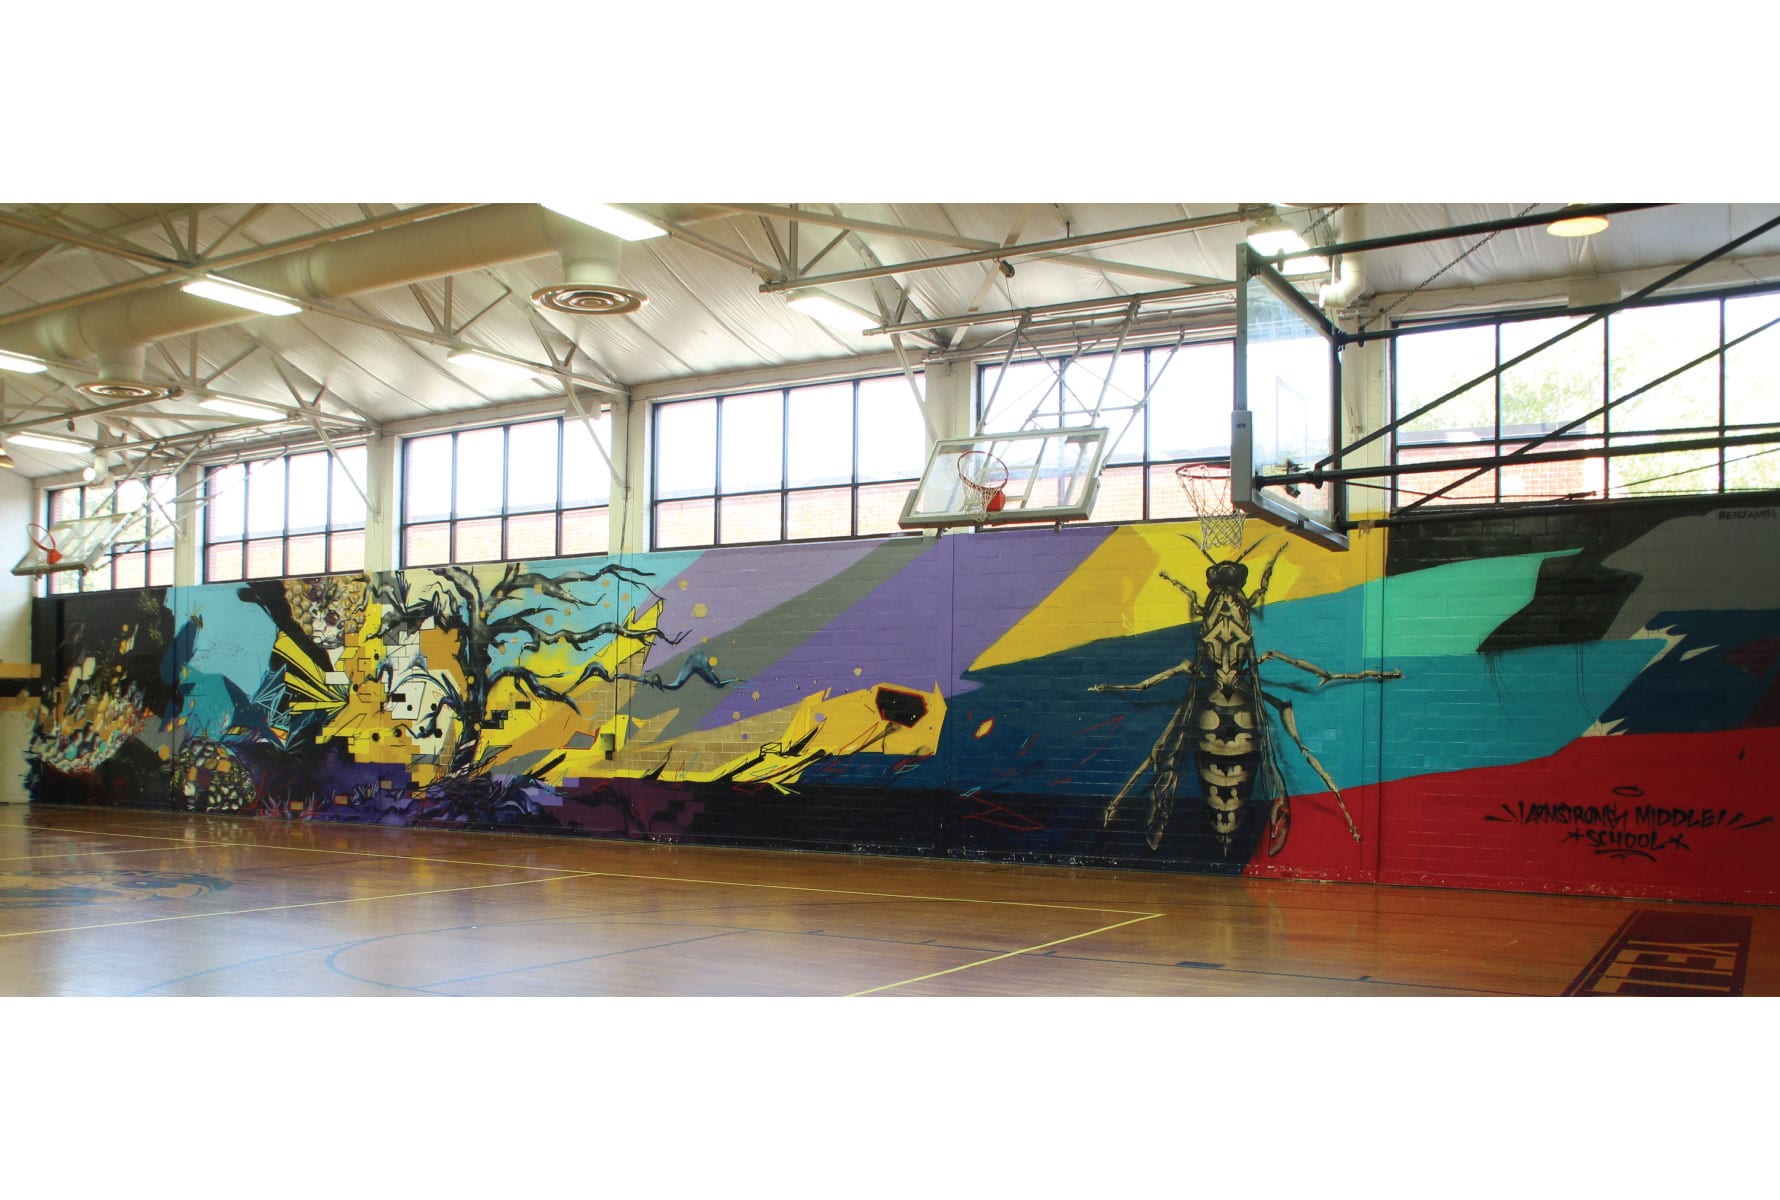 mural - armstrong middle school by benjamin weimeyer located in mississippi